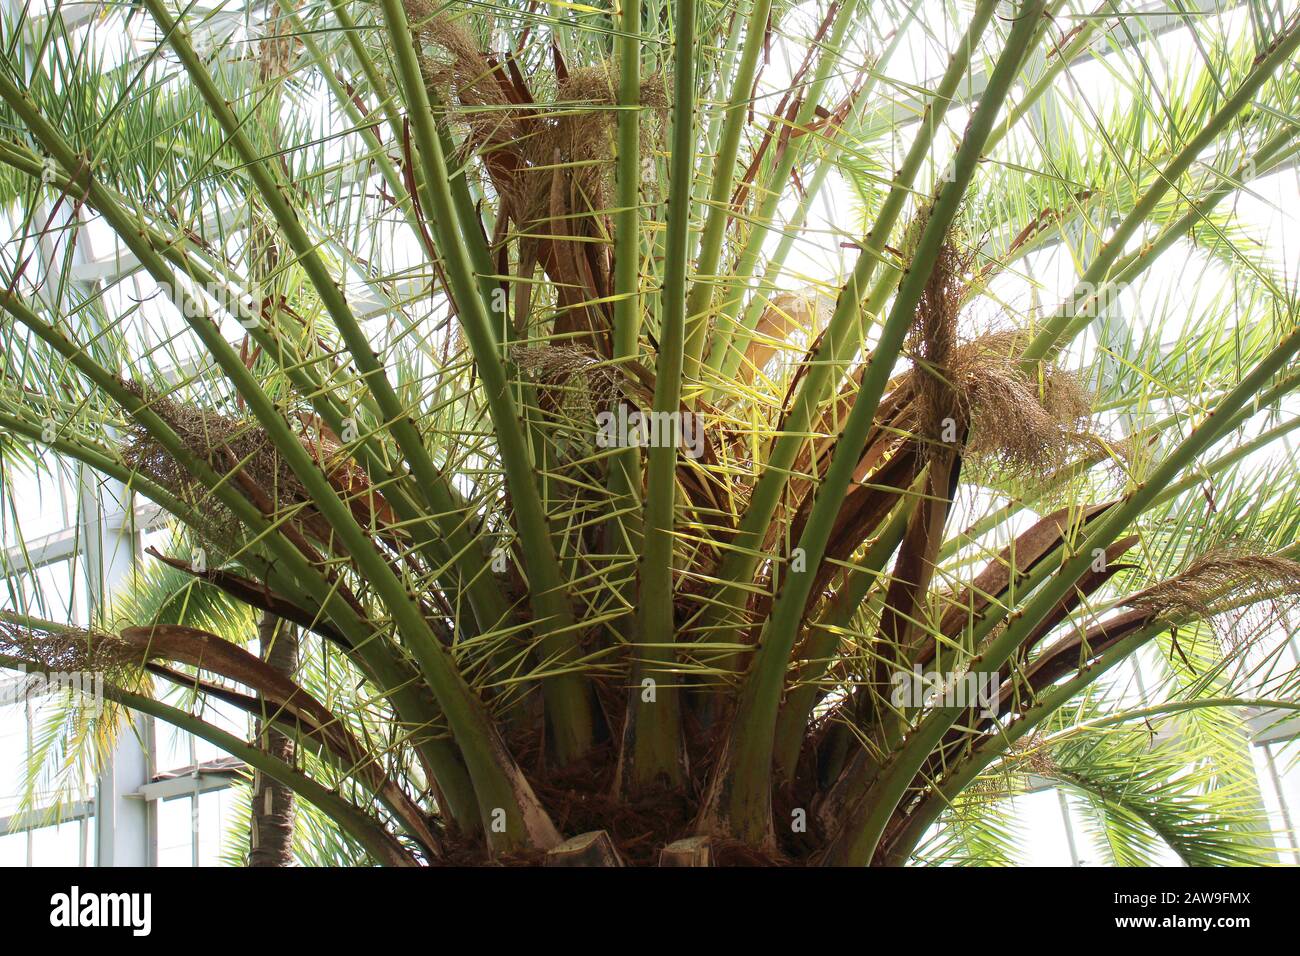 Close up of the arching pinnate fronds with new leaves beginning to unfurl of a Canary Island Thatch Palm growing in a conservatory Stock Photo